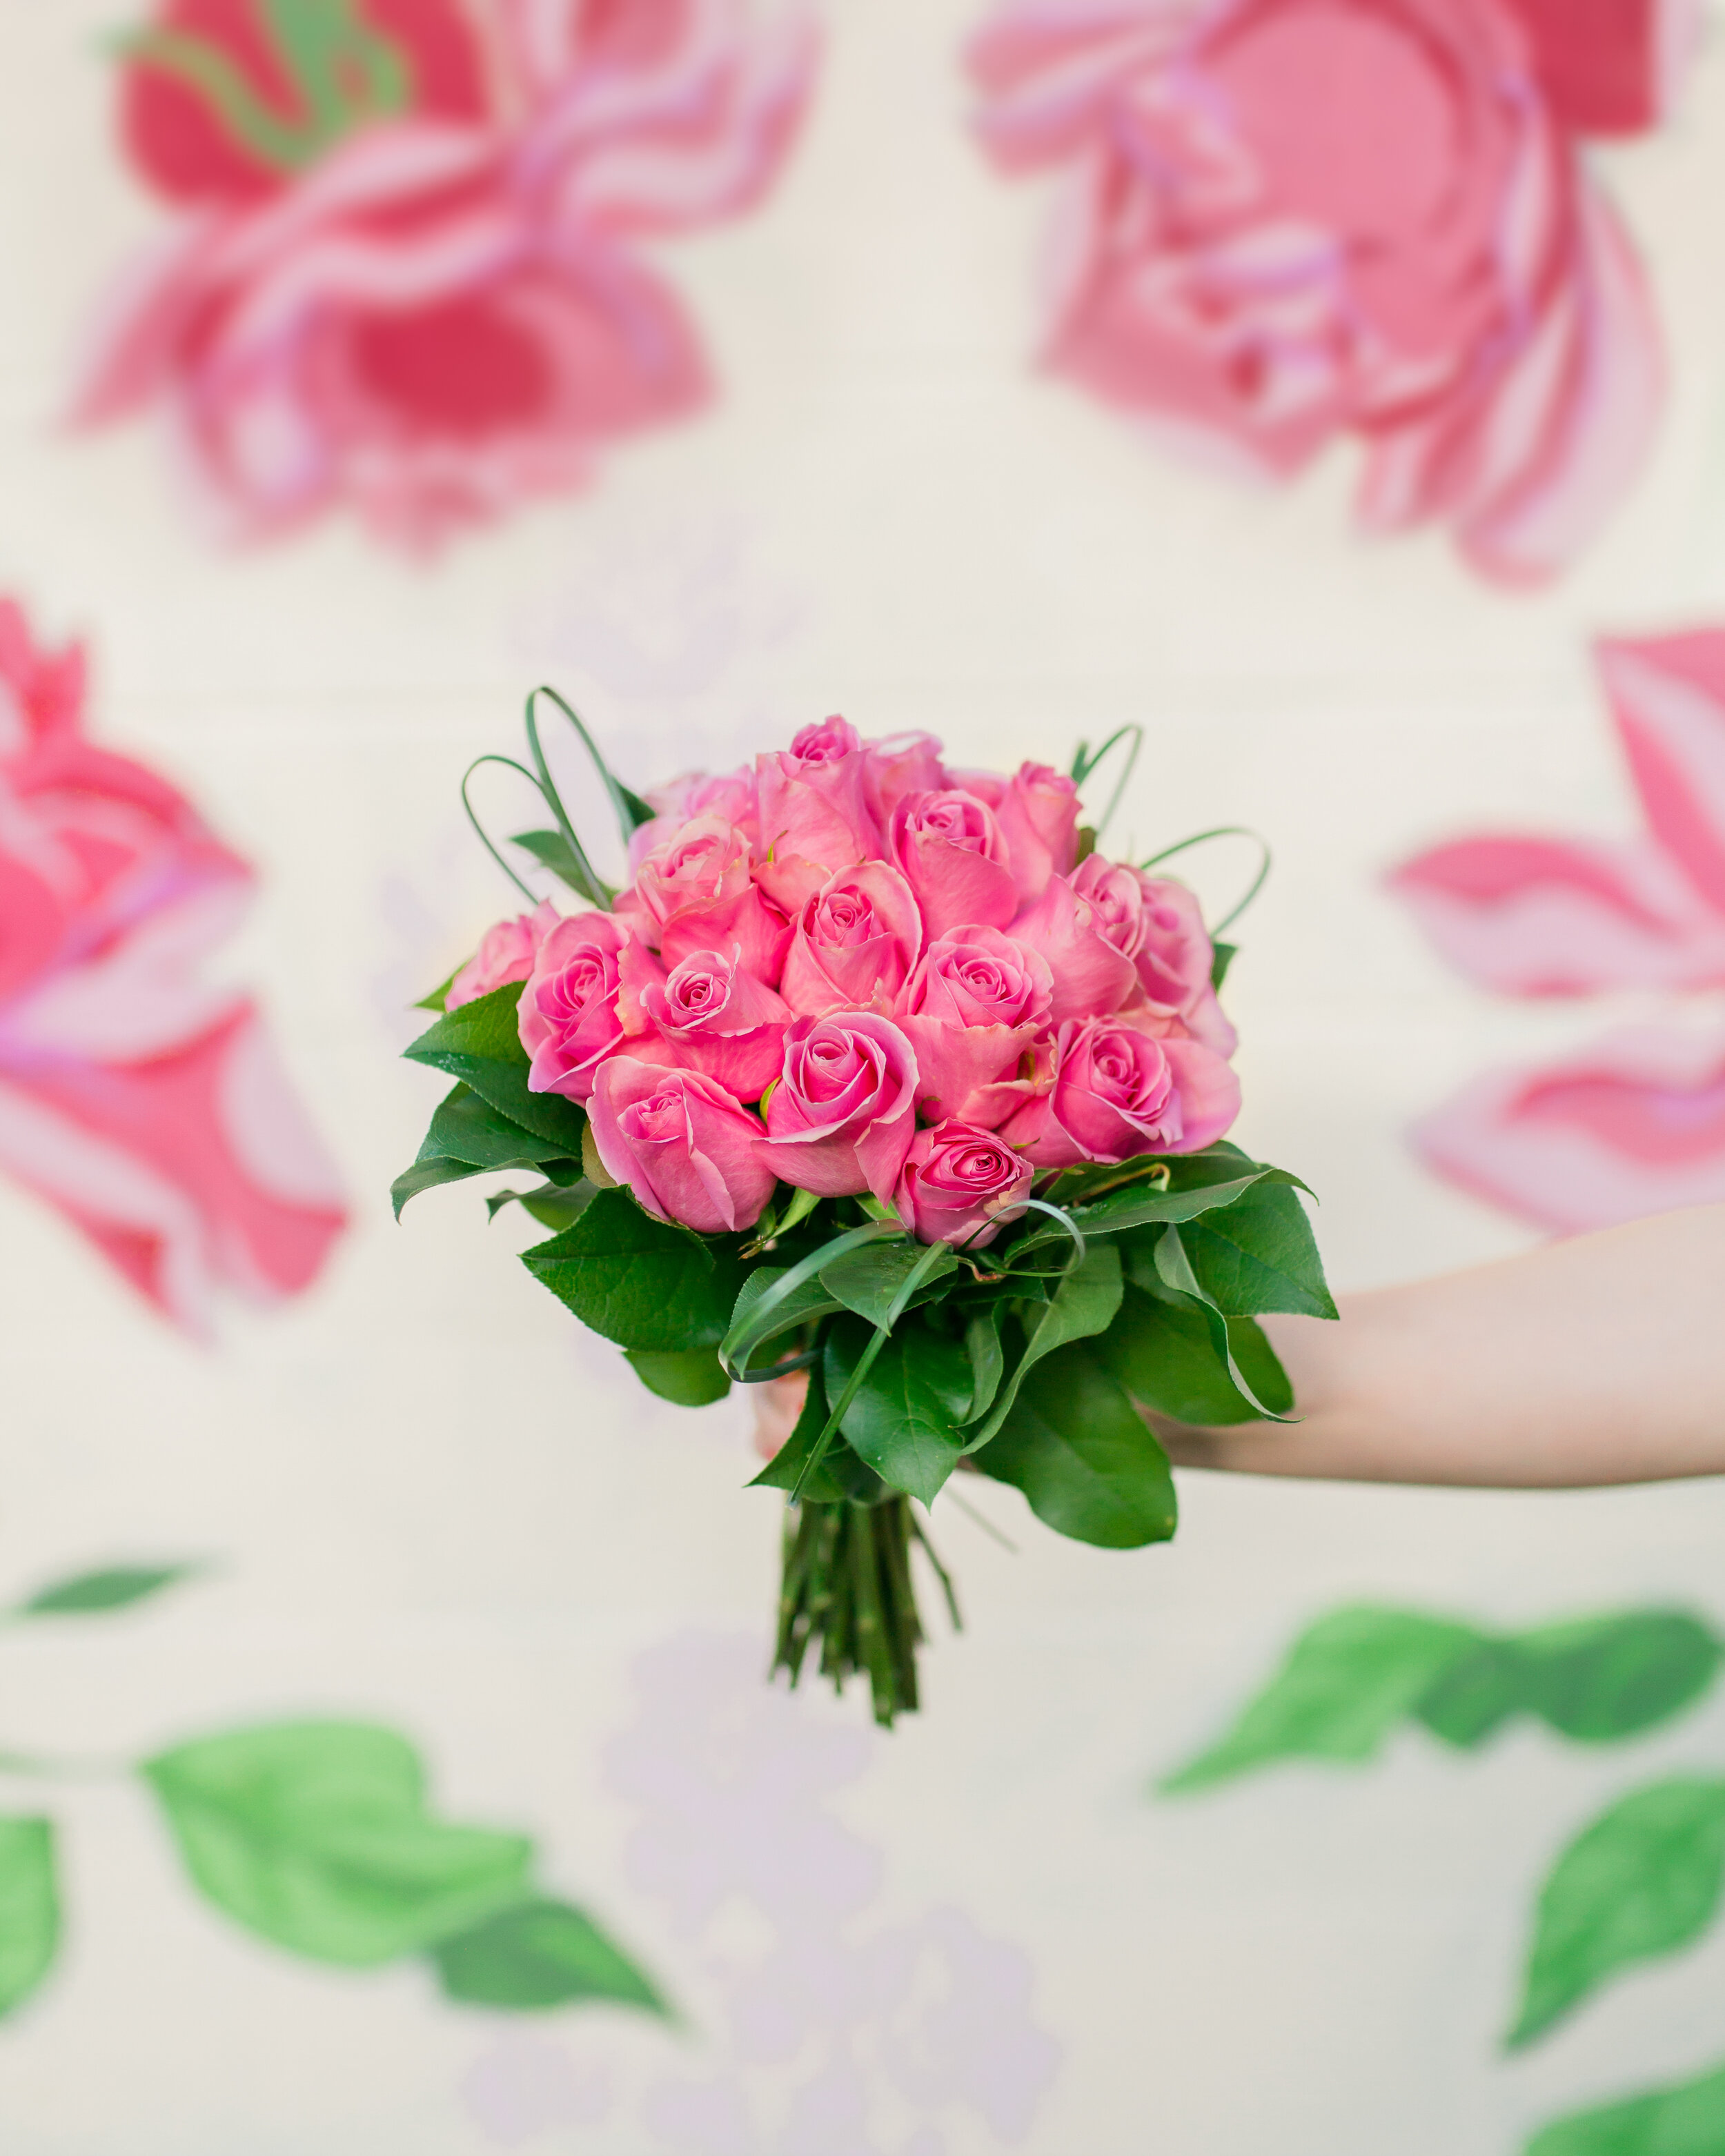 ChristinaBestPhotography_Dressed_to_Match_Michelle_roses-2-Edit.jpg